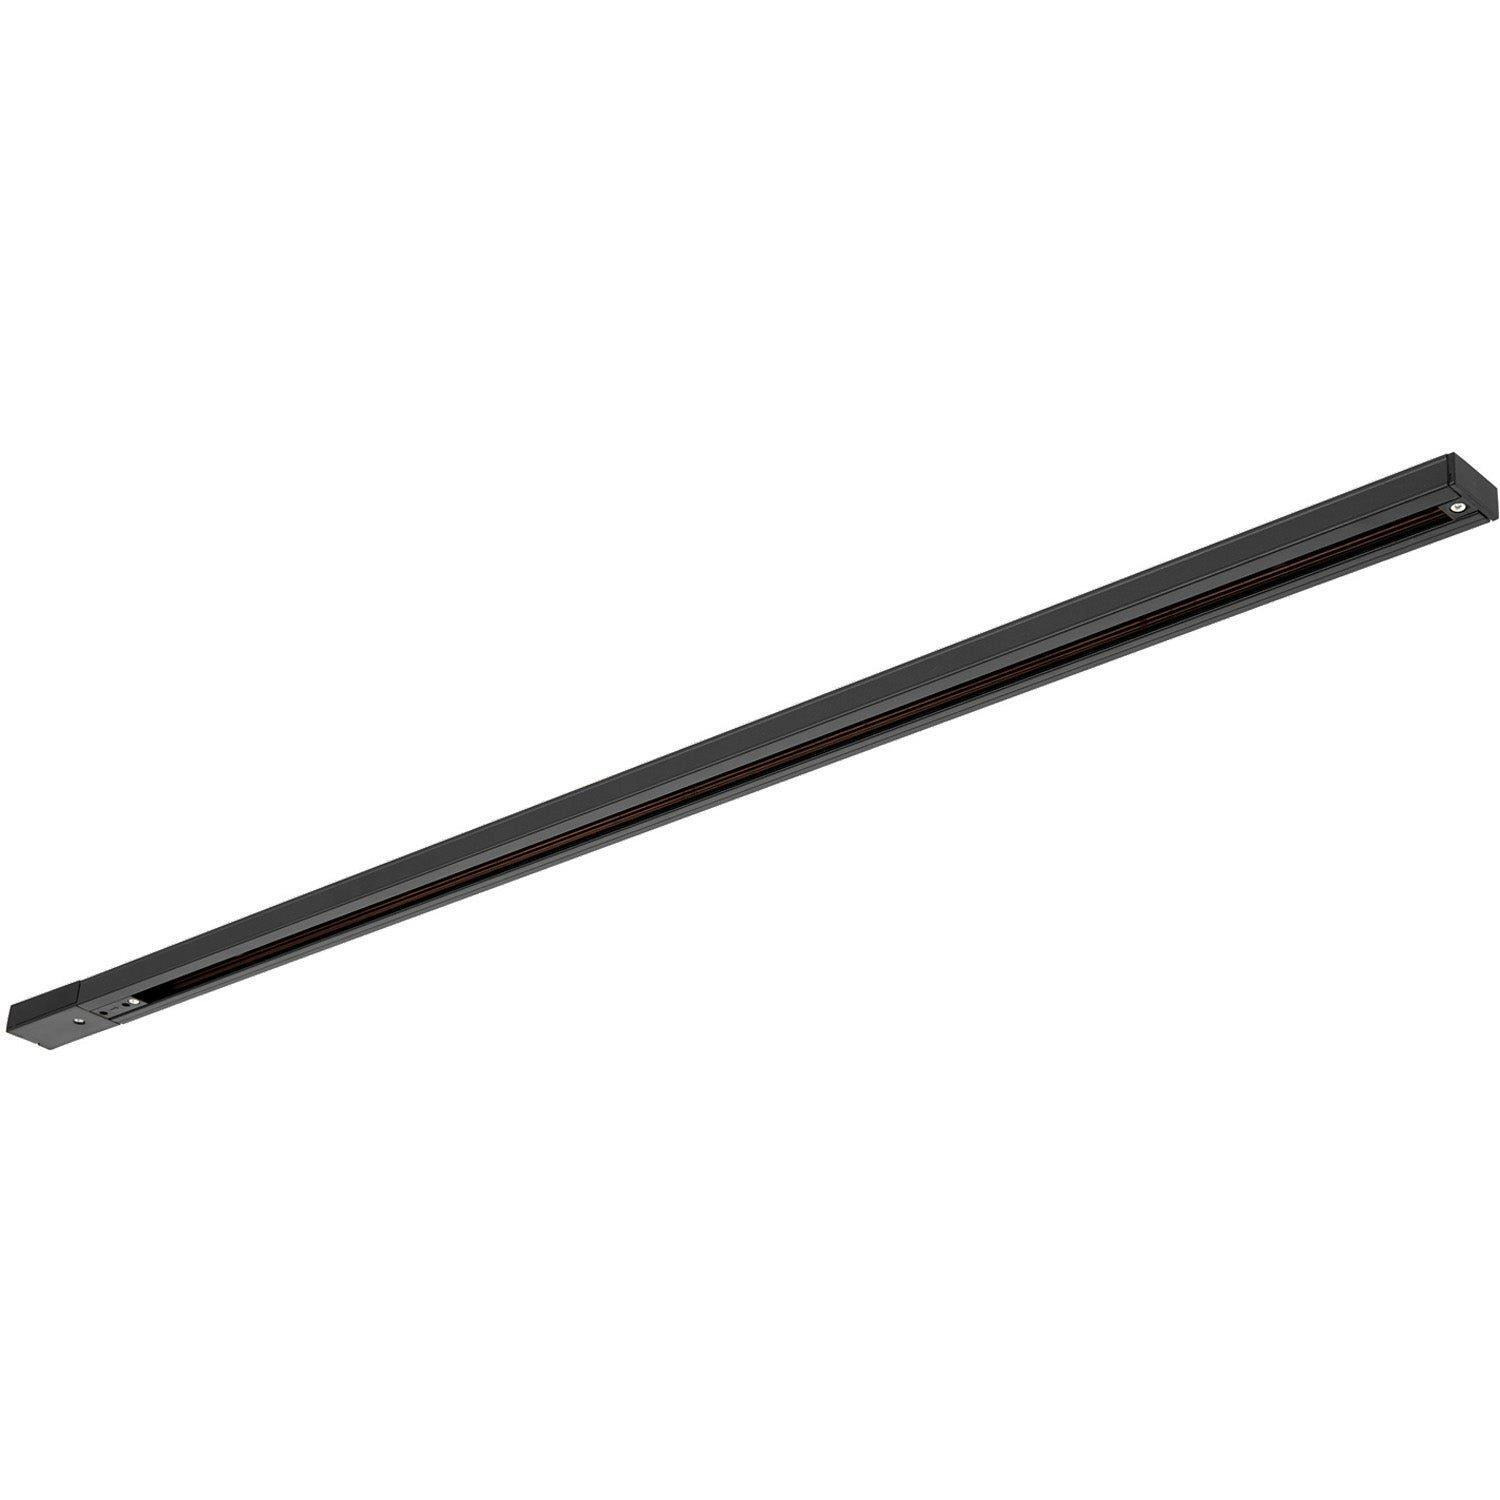 2m Commercial Lighting Display Track - Live & Dead Ends - Black - Single Circuit - image 1